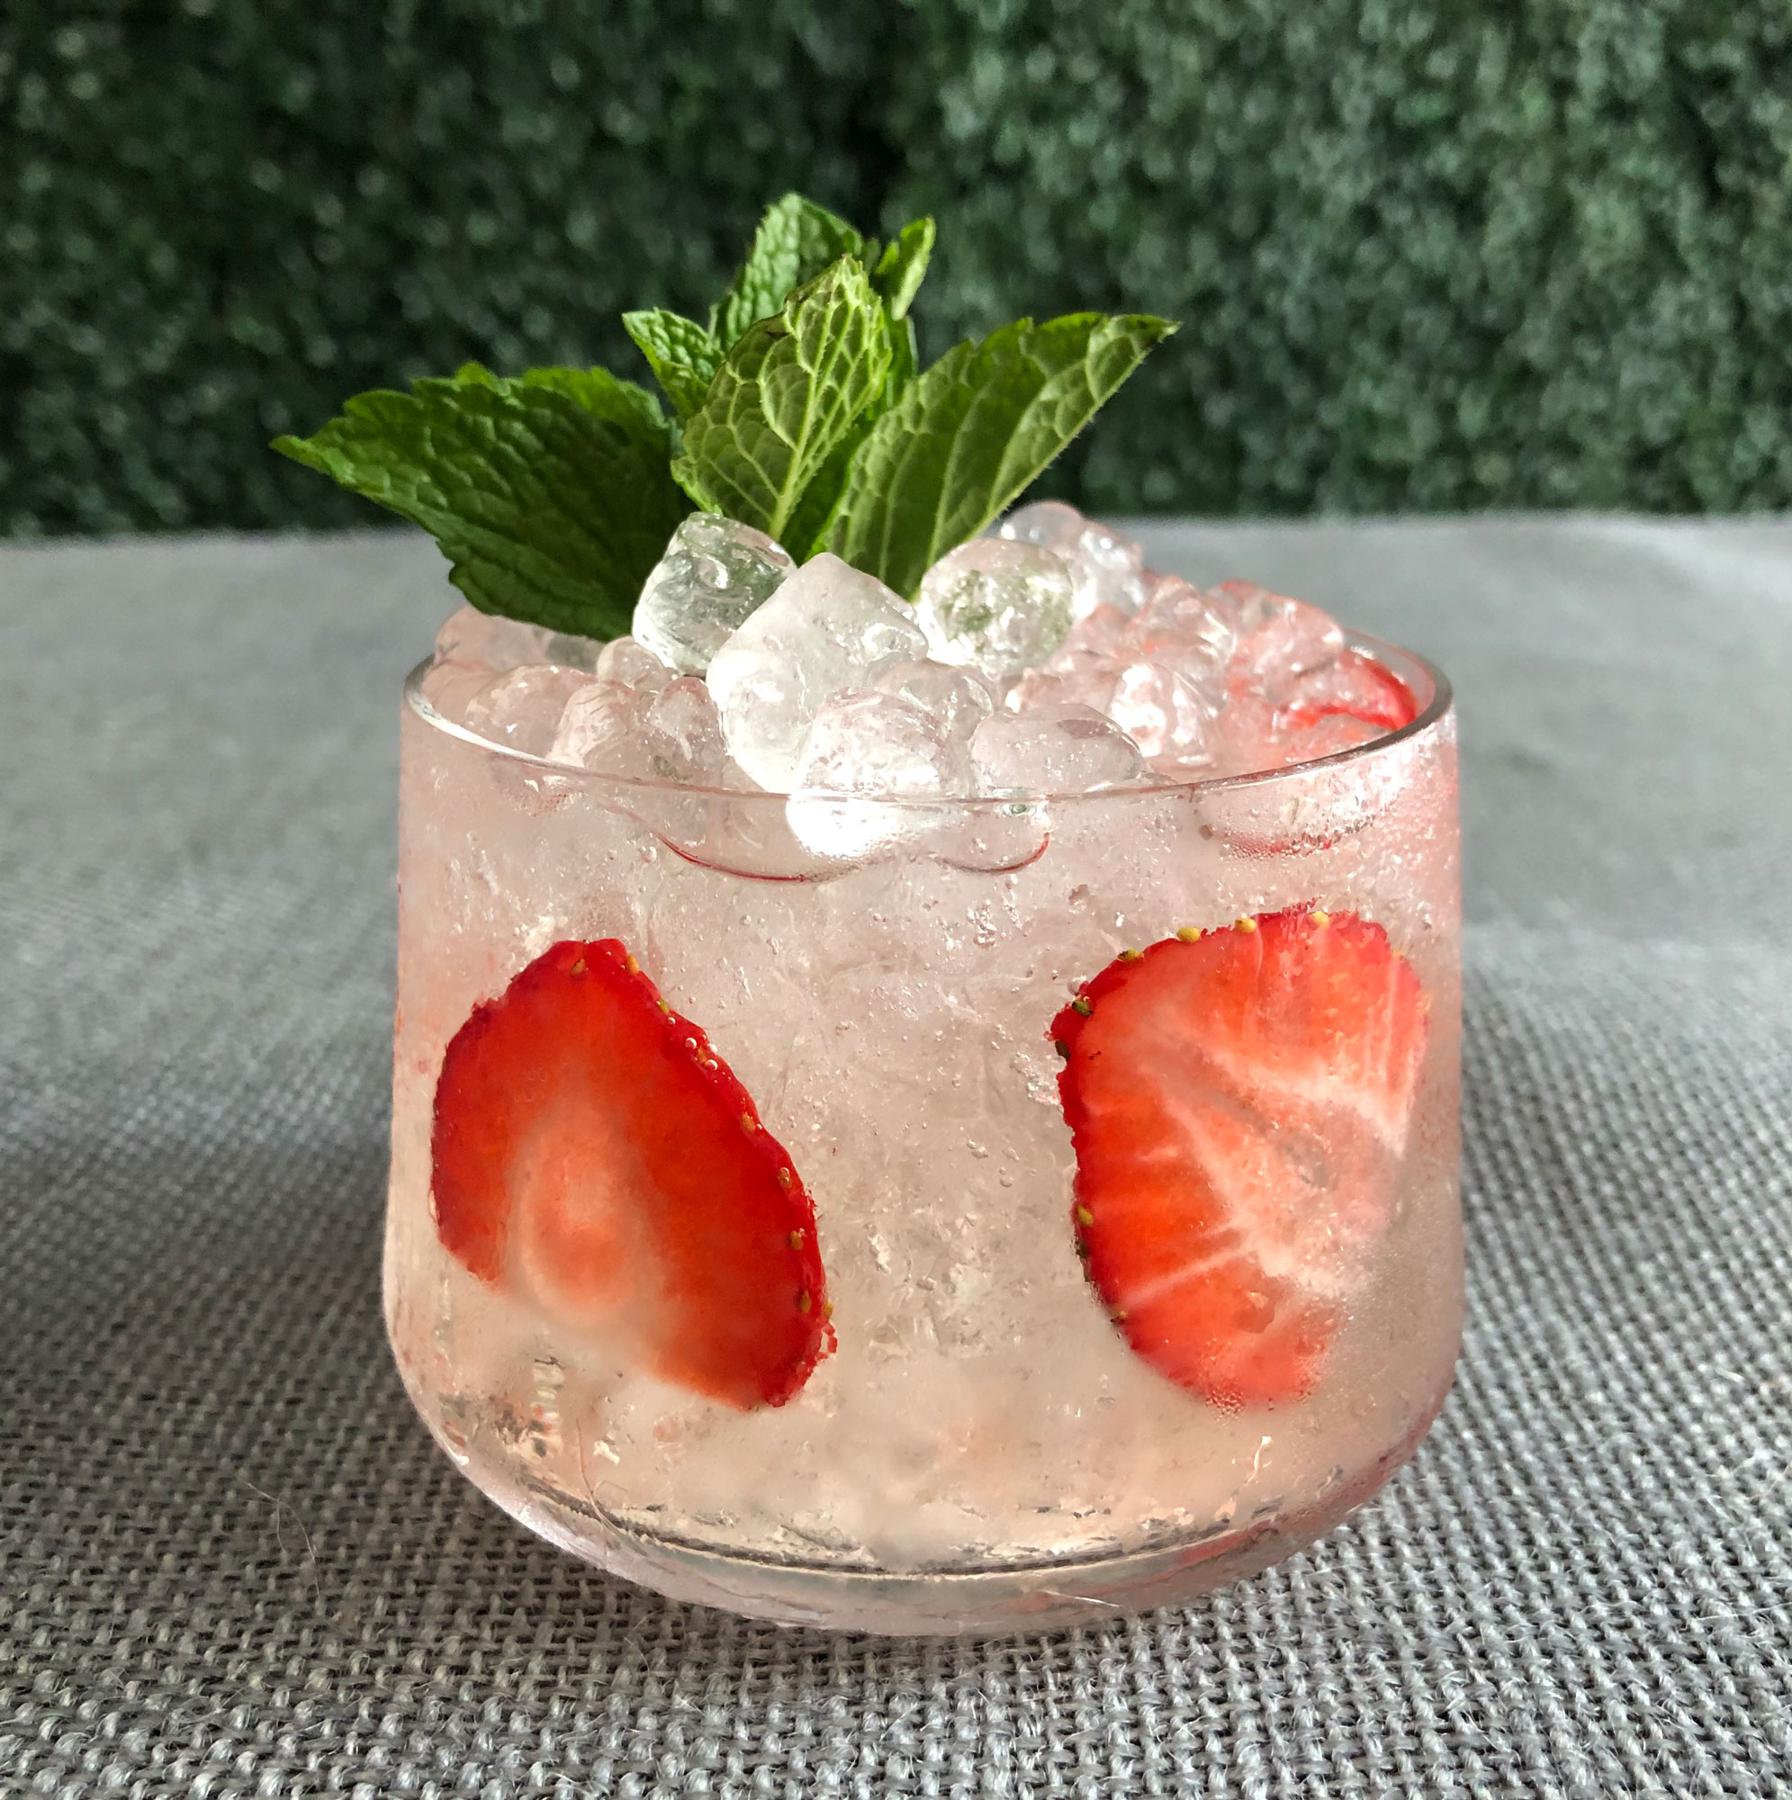 An example of the Chambéry Spritz, the mixed drink (drink) featuring Dolin Blanc Vermouth de Chambéry, soda water, strawberry, and lemon twist; photo by Lee Edwards